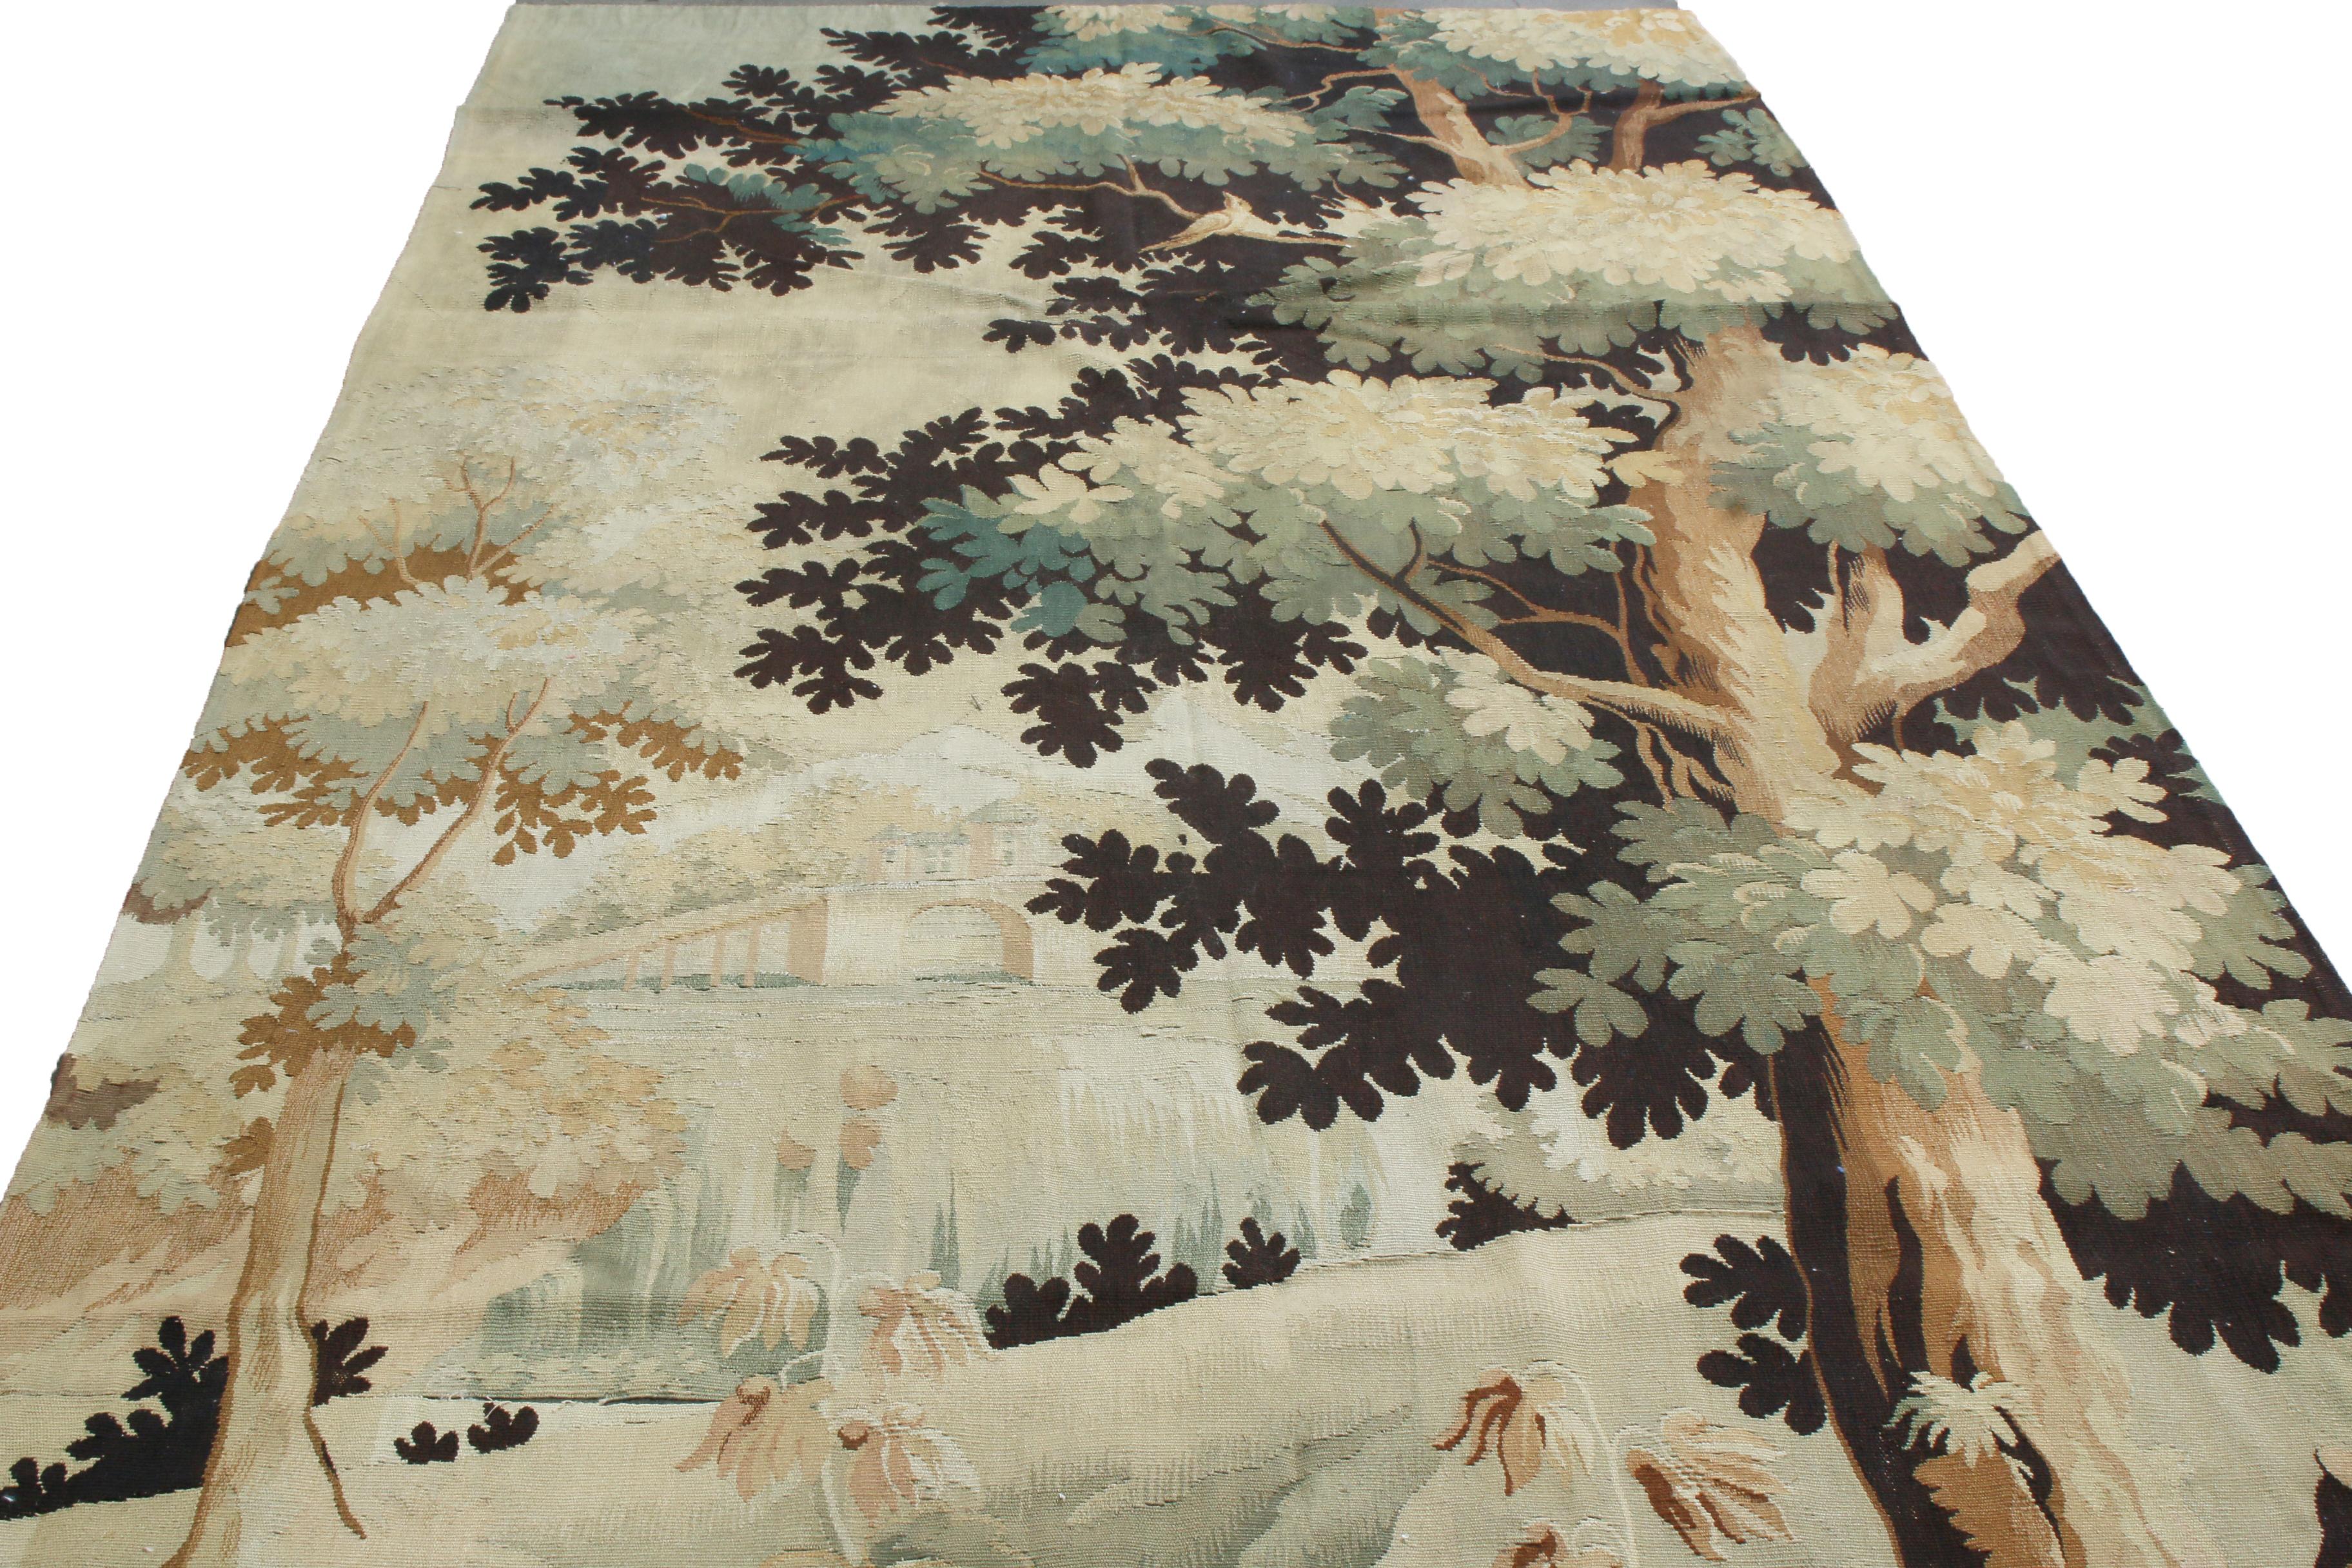 Originating from France between 1900-1910, this traditional antique French tapestry is handmade with a fine wool body, depicting a uniquely stylized, borderless forest scene beside a river. Enjoying a more advanced take on the hyper-realistic scenes